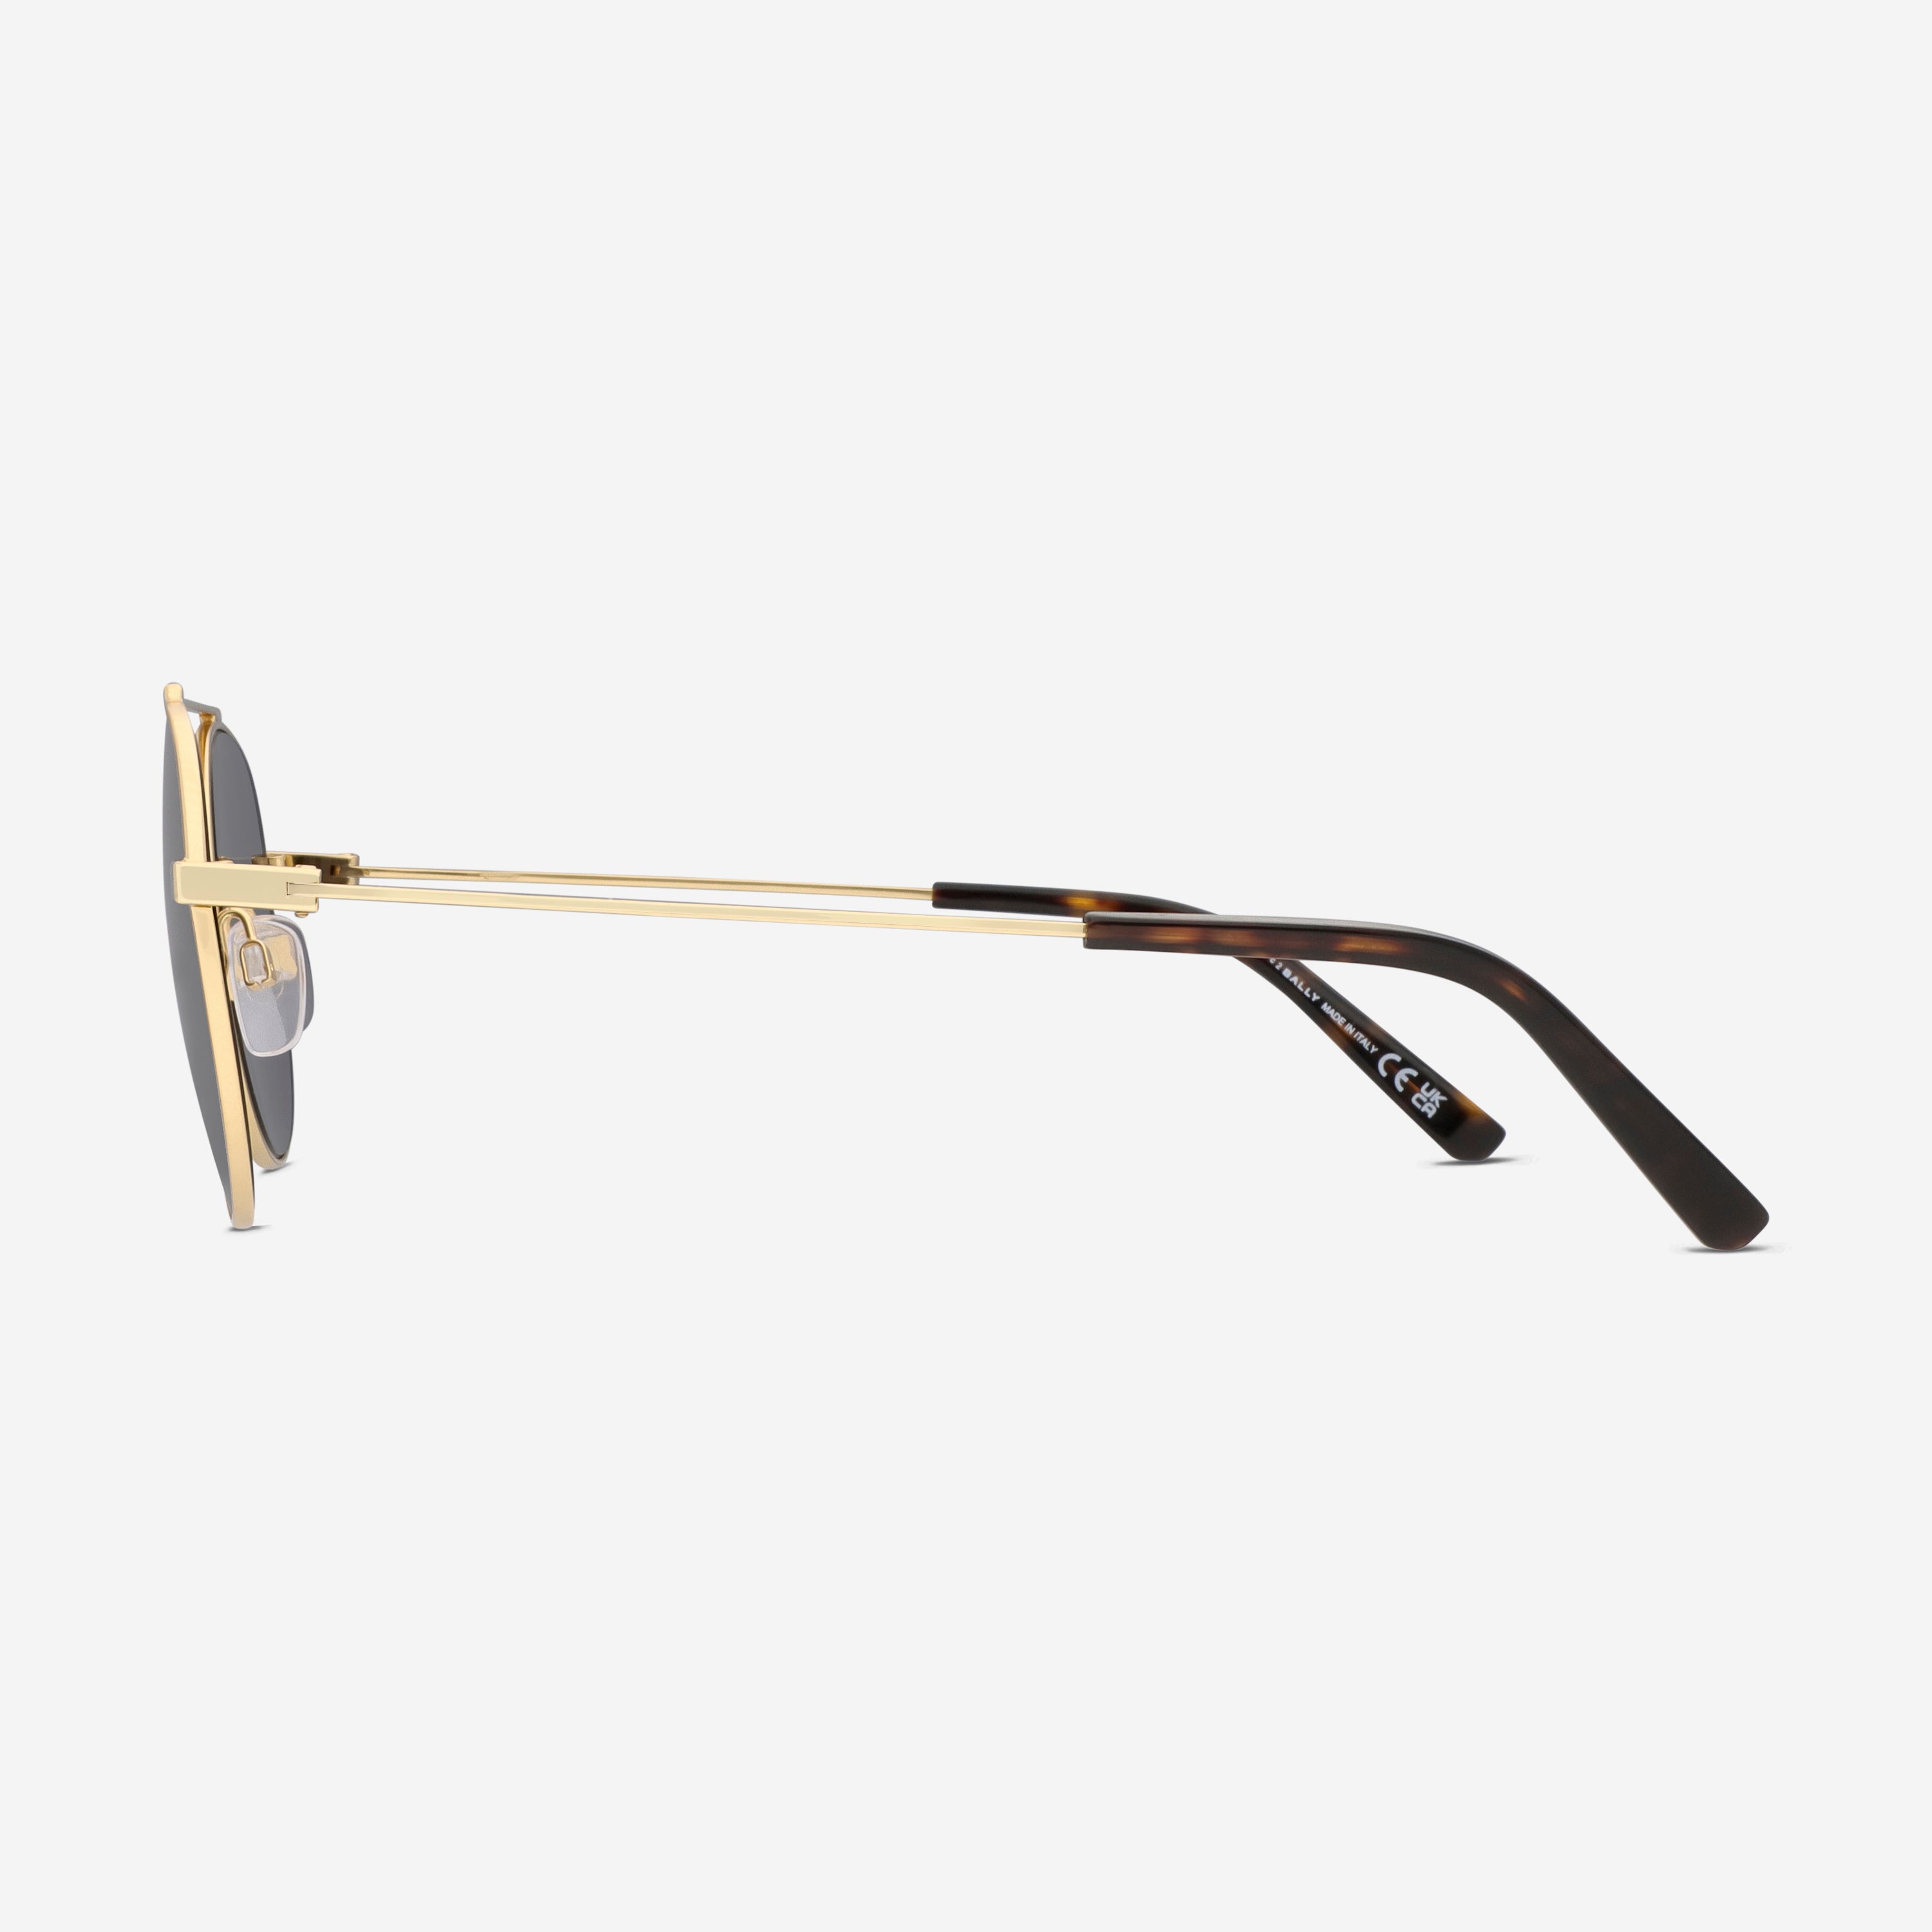 Bally Sunglasses BY0017-D 28E Rose Gold Pink – Discounted Sunglasses